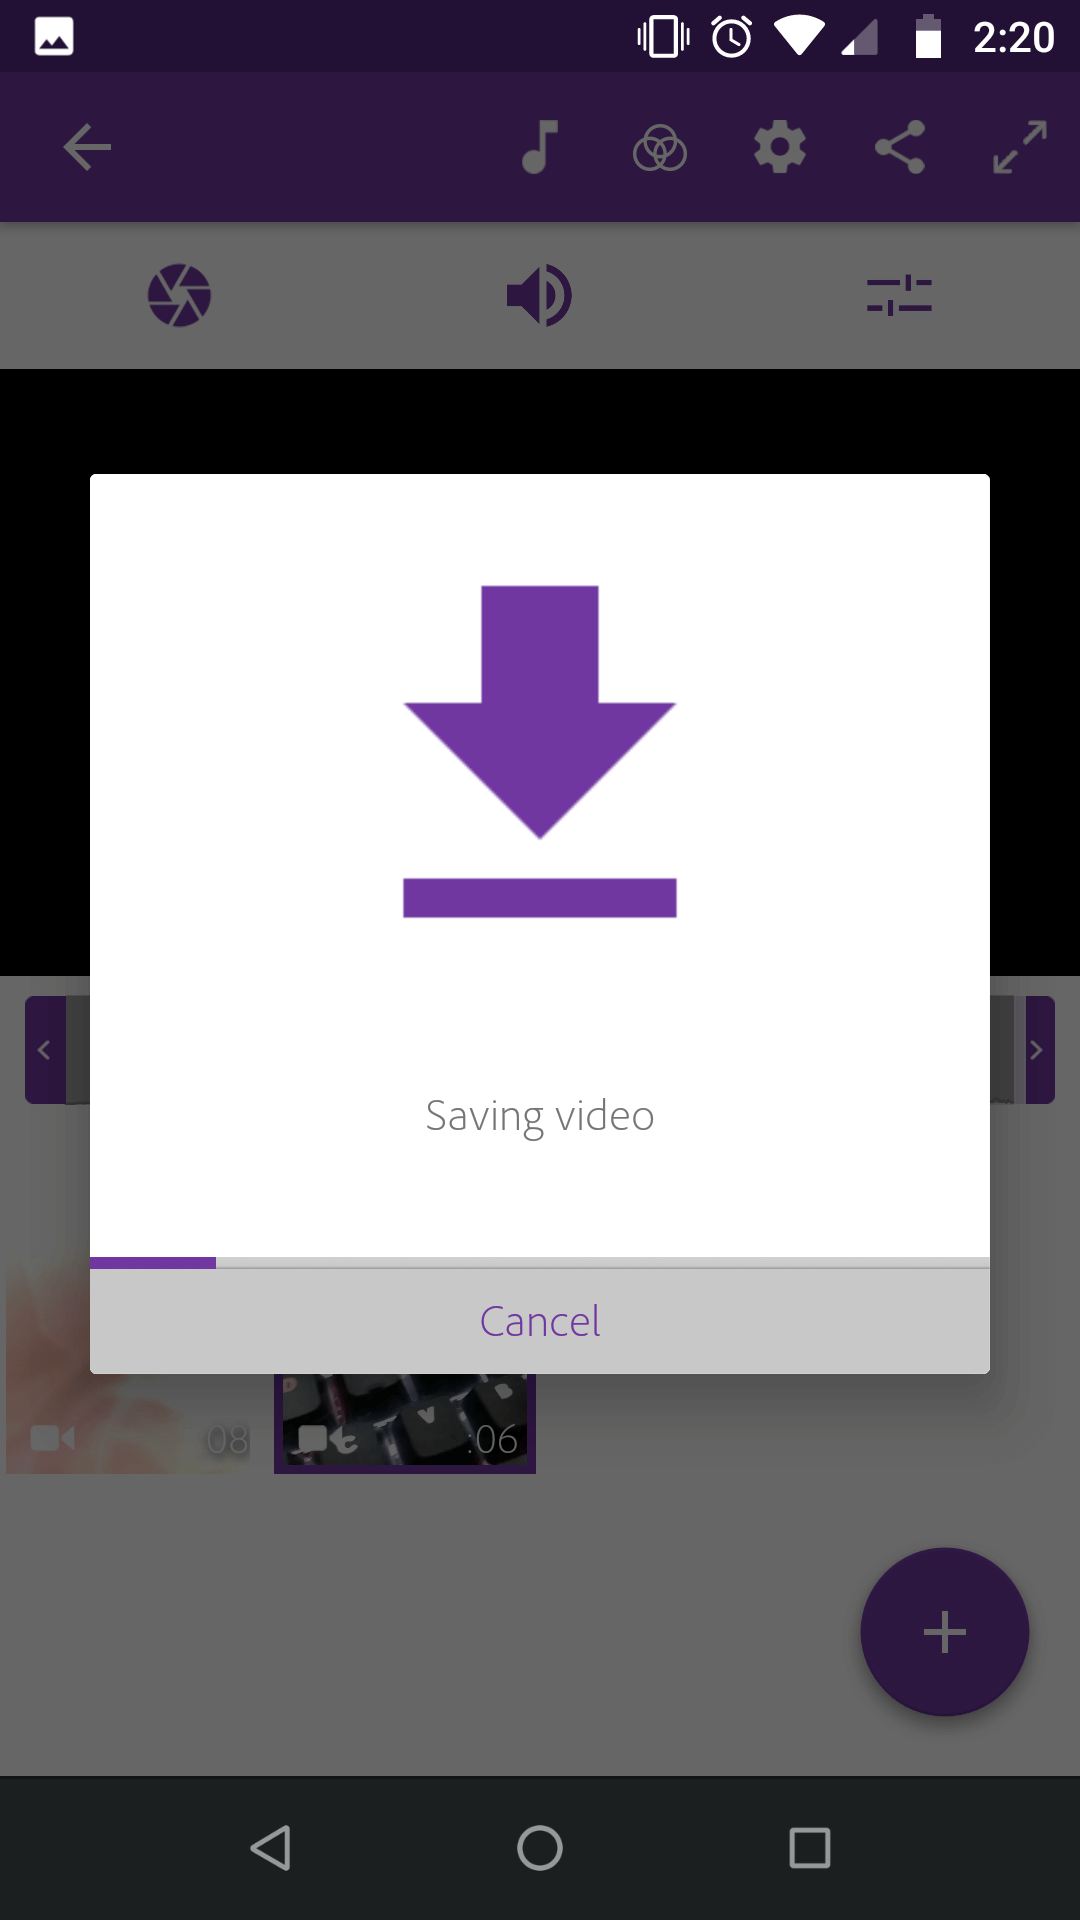 Export your video on Android with Adobe Premiere Clip